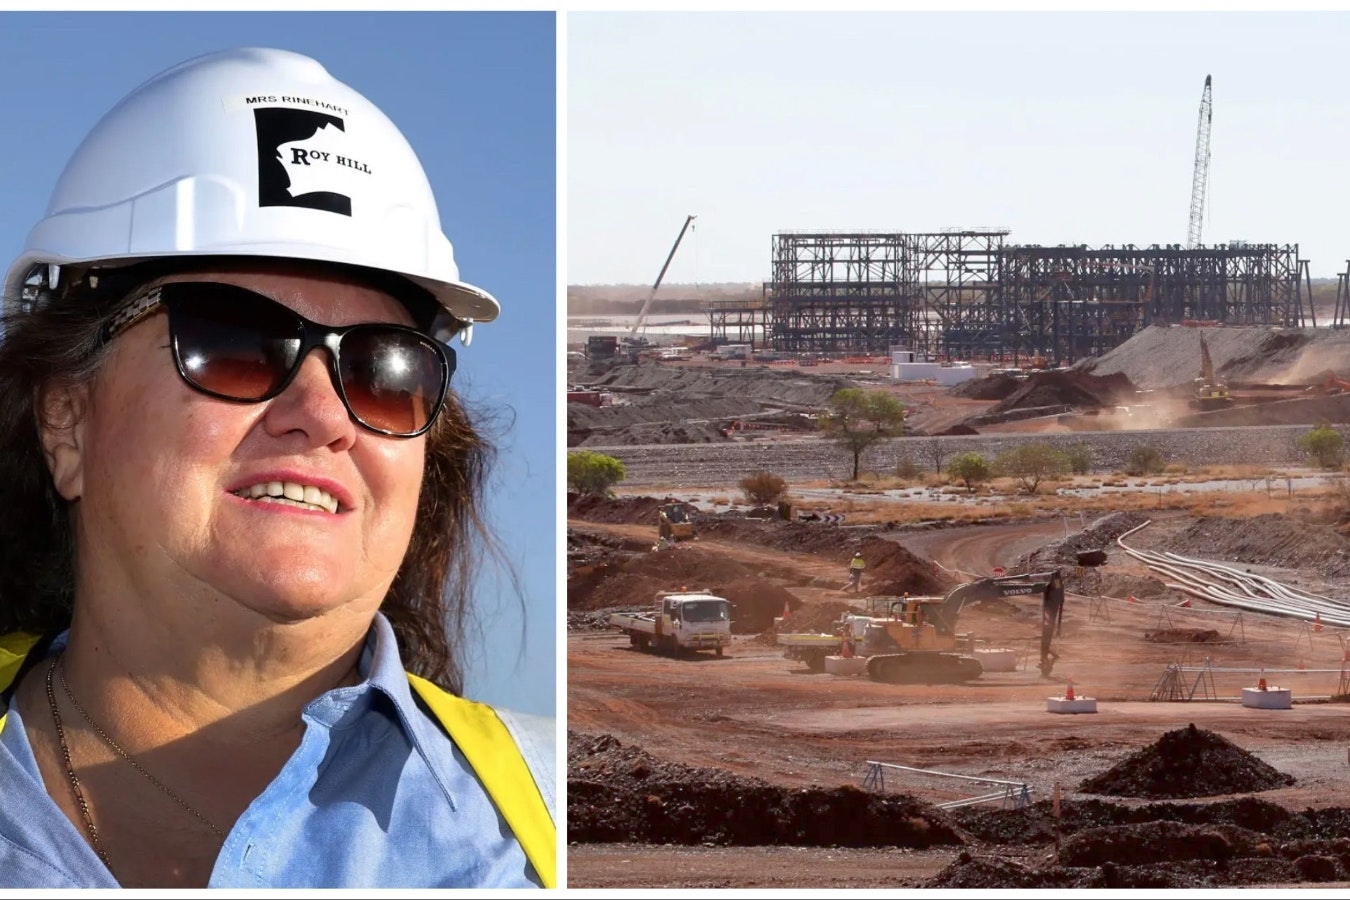 Gina Rinehart, the Austrailian billionaire behind Hancock Prospecting Pty Ltd is branching out to acquire minority stakes in rare earth mining, making some believe she may be working to consolidate the rare earths industry. At right is Hancock's Roy Hill Mine in western Australia.